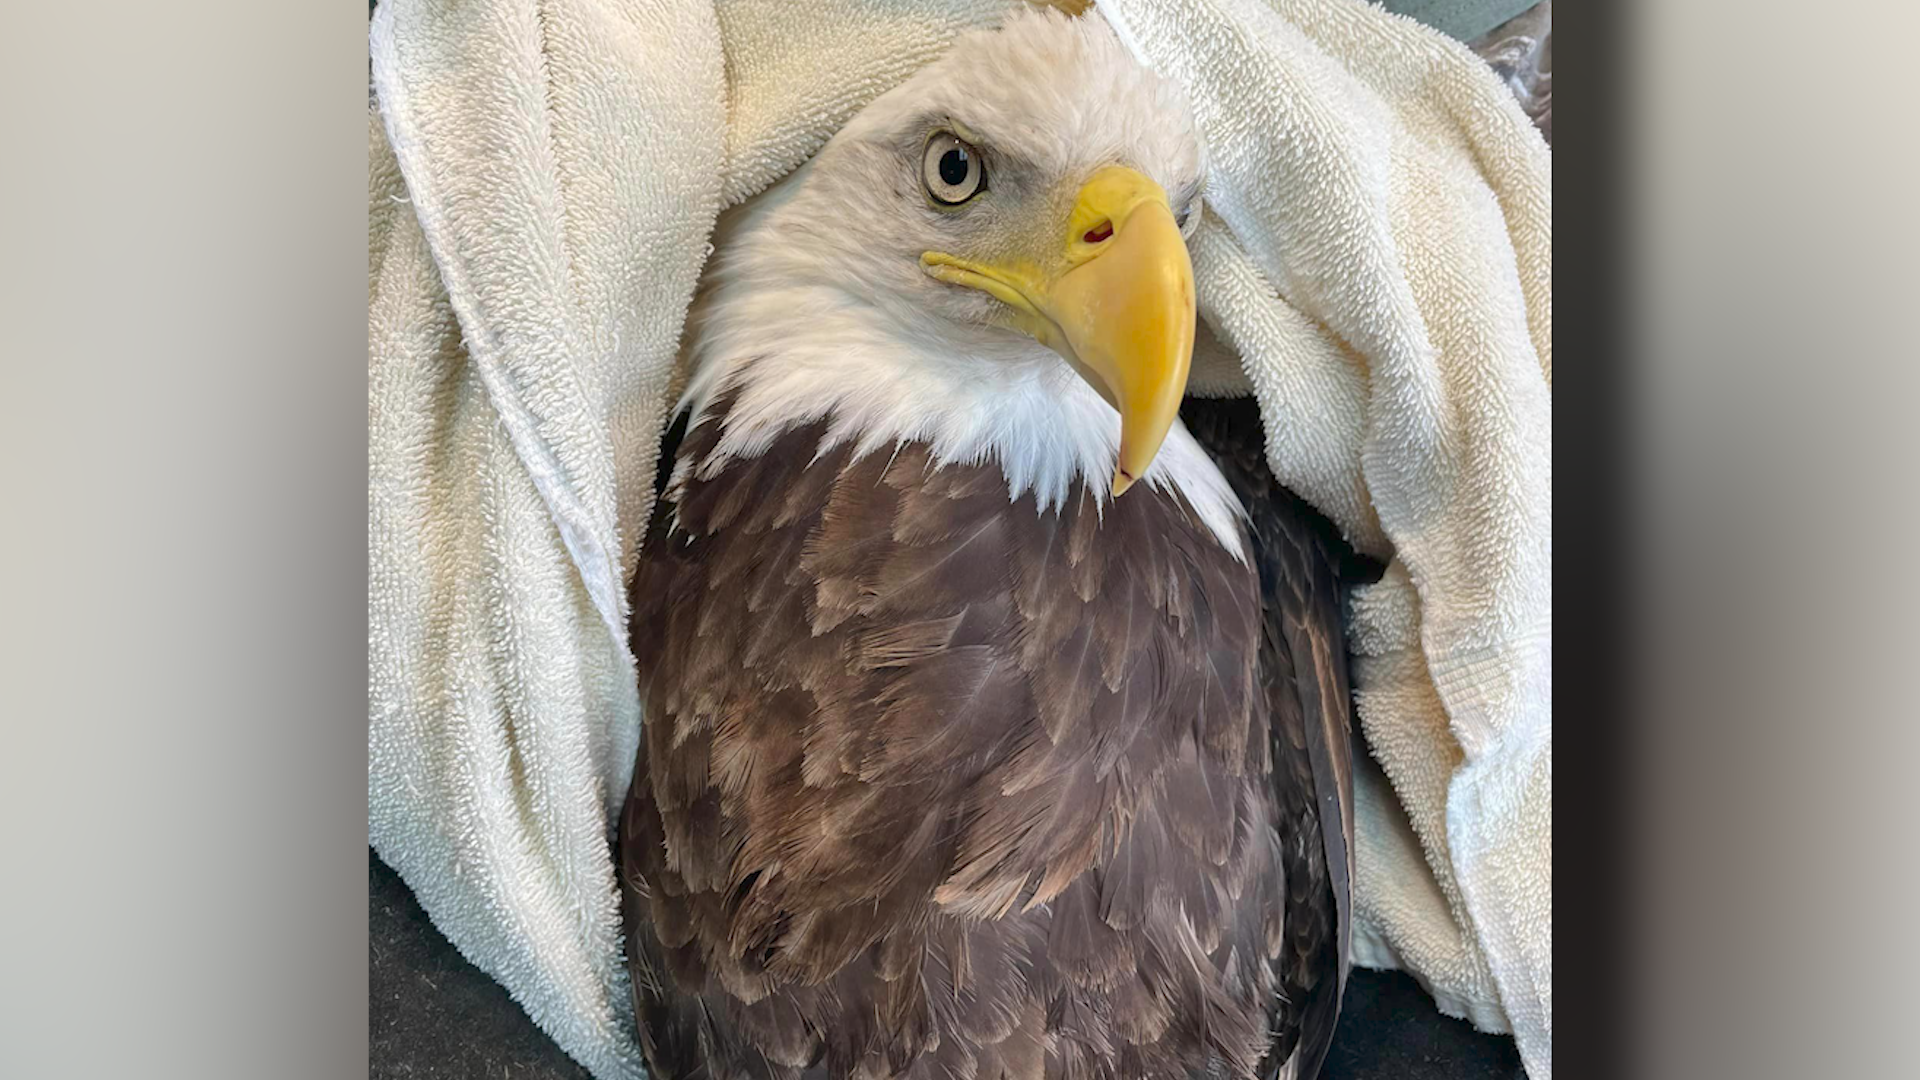 6 shotgun shells later: the miraculous recovery of an injured bald eagle  from rescue to flight - WNKY News 40 Television